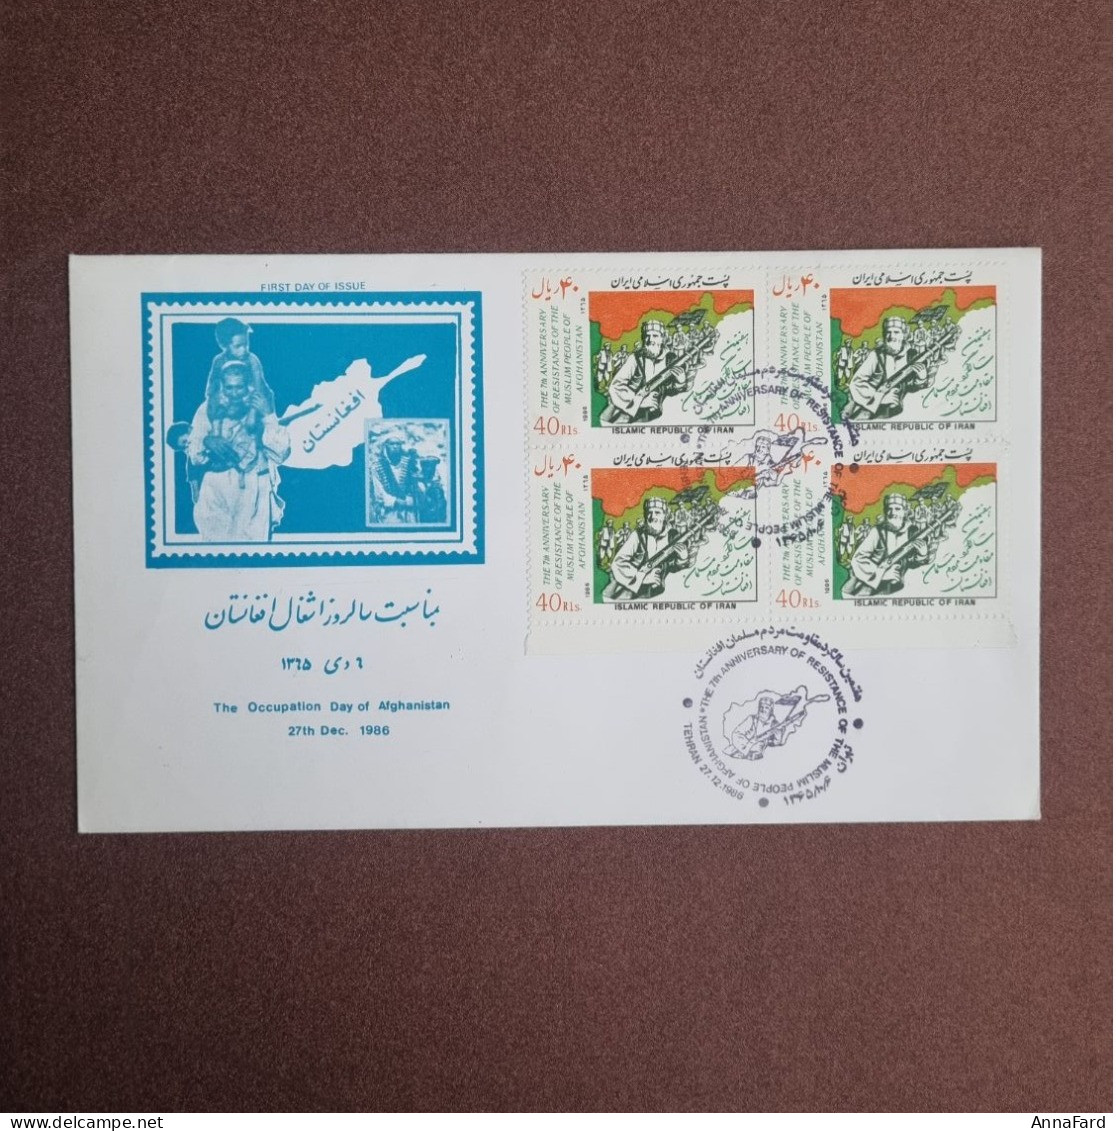 1985 Iran 7th Anniv. Of Resistance In Afghanistan Fdc Franked With Block Of 4 Scott No: 2251 - Iran